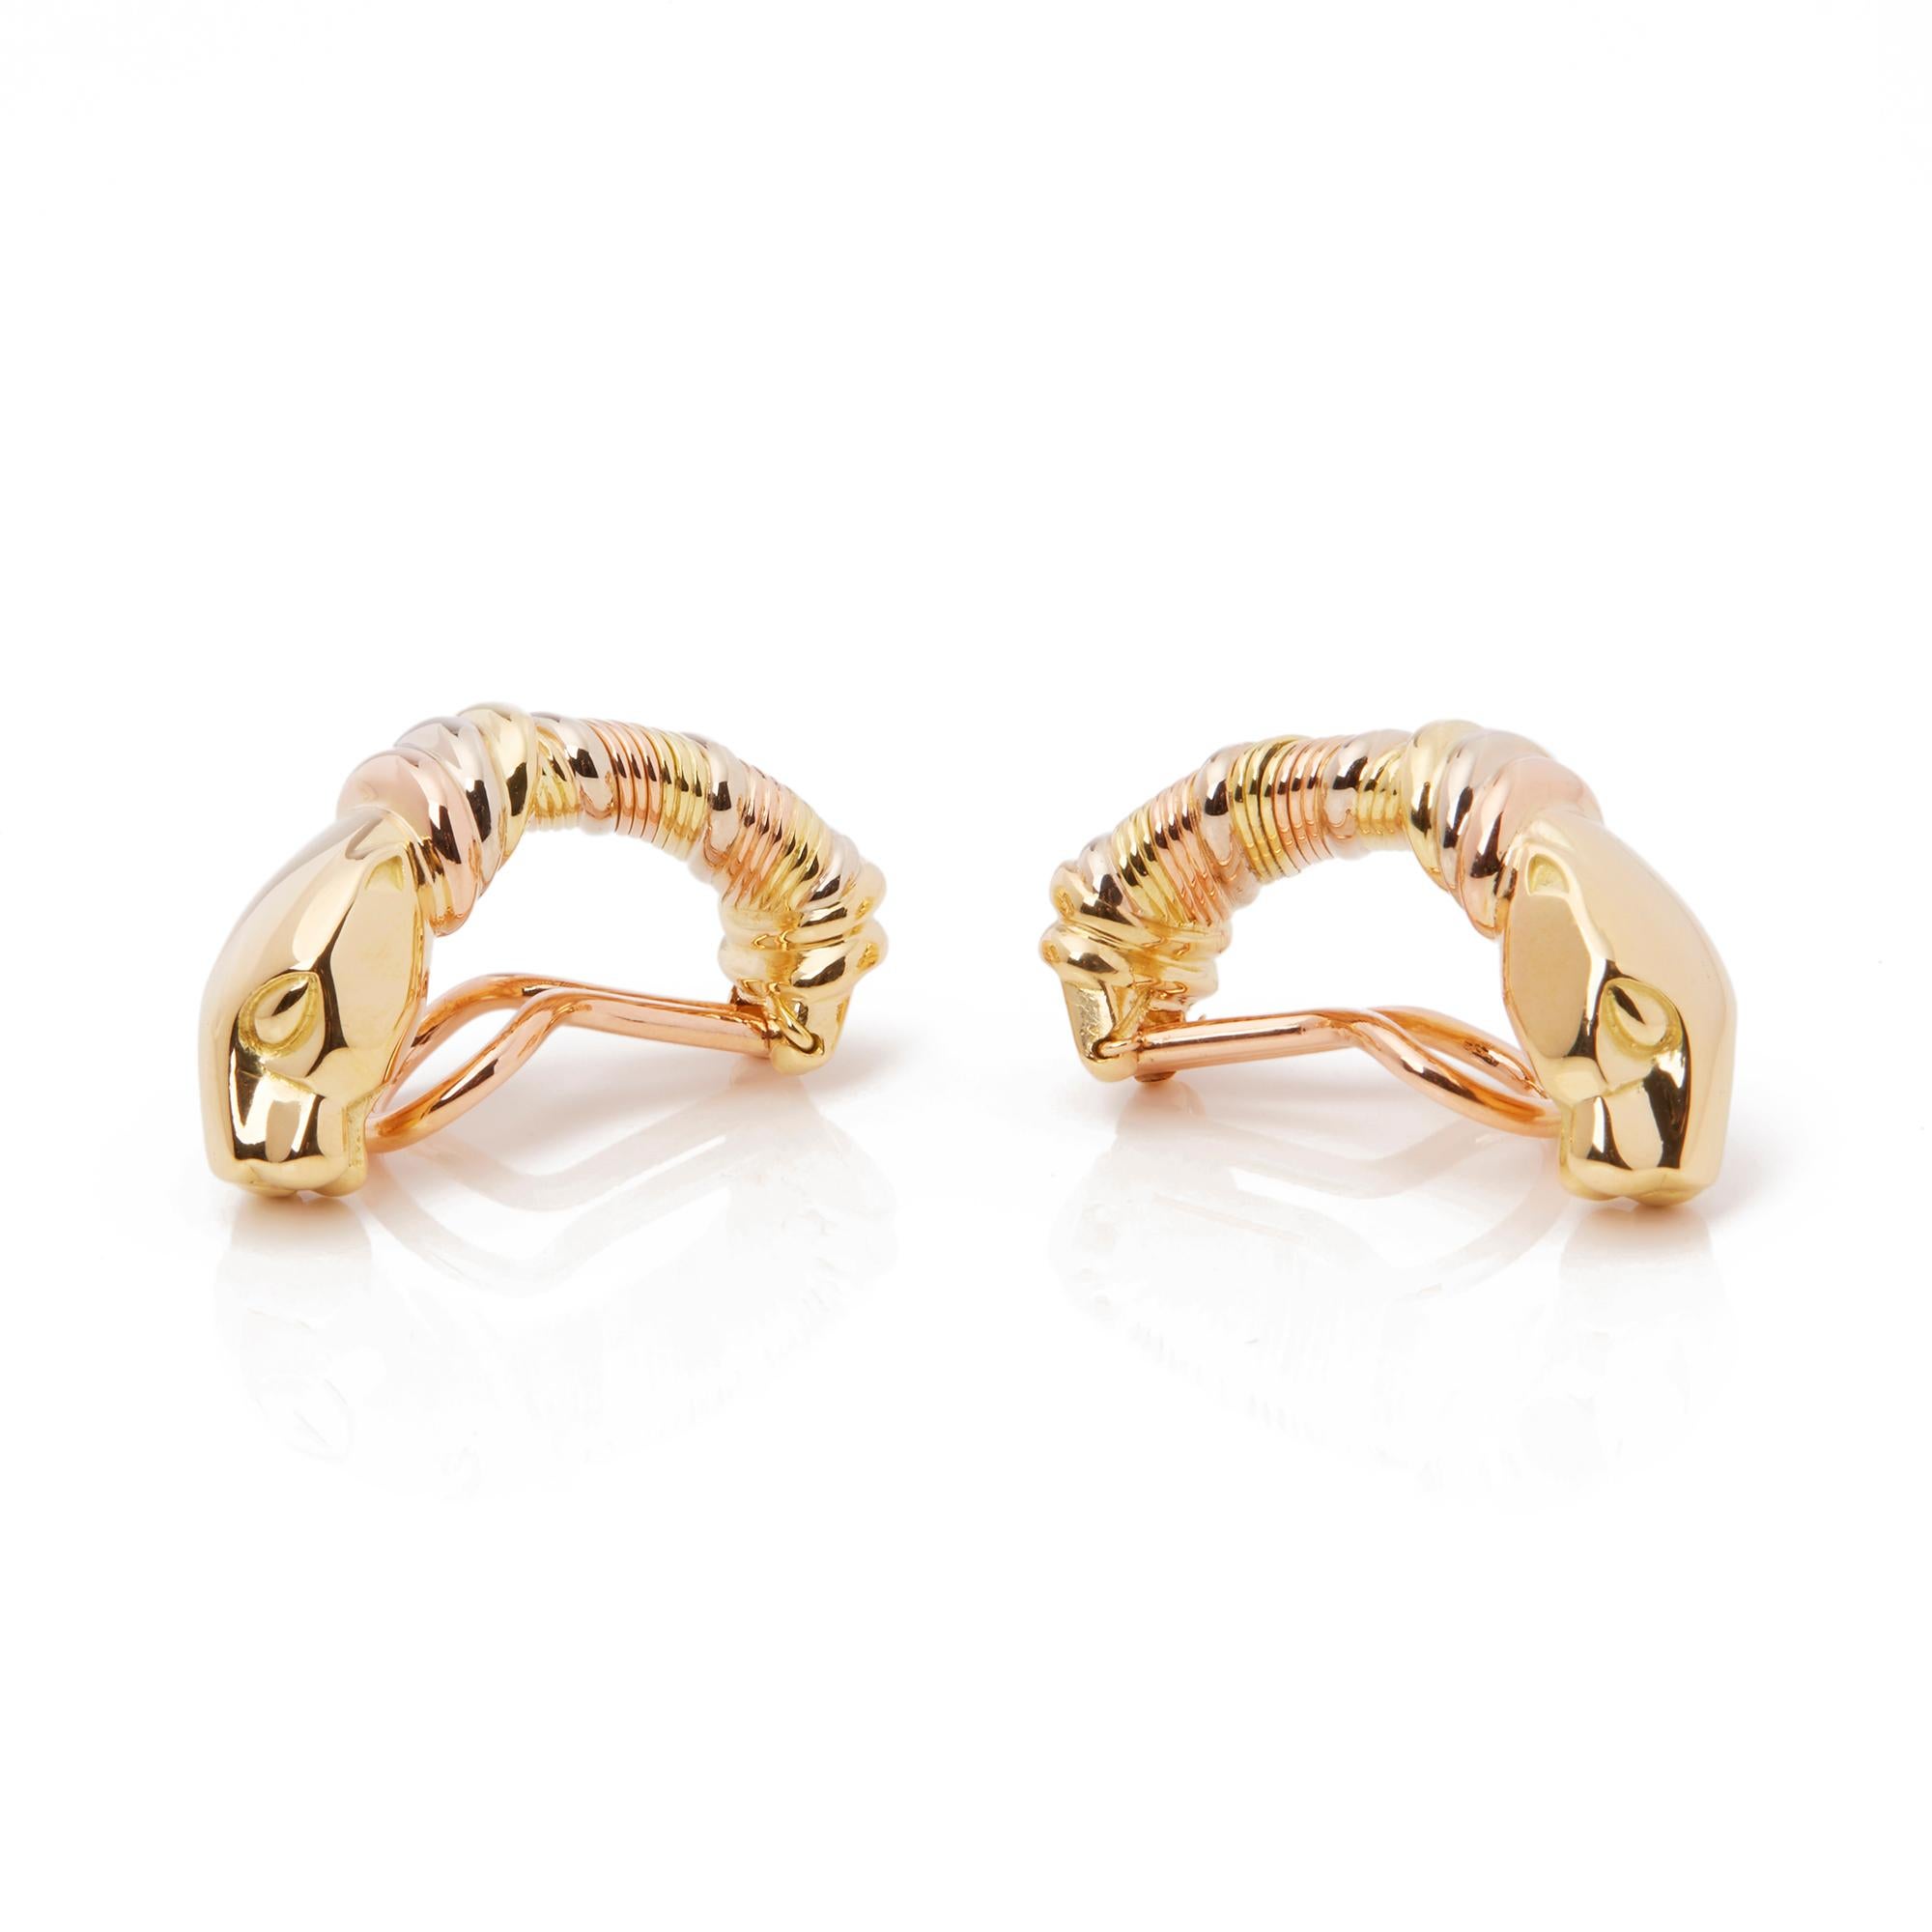 Modern Cartier 18 Karat Yellow, White and Rose Gold Panthère Earrings